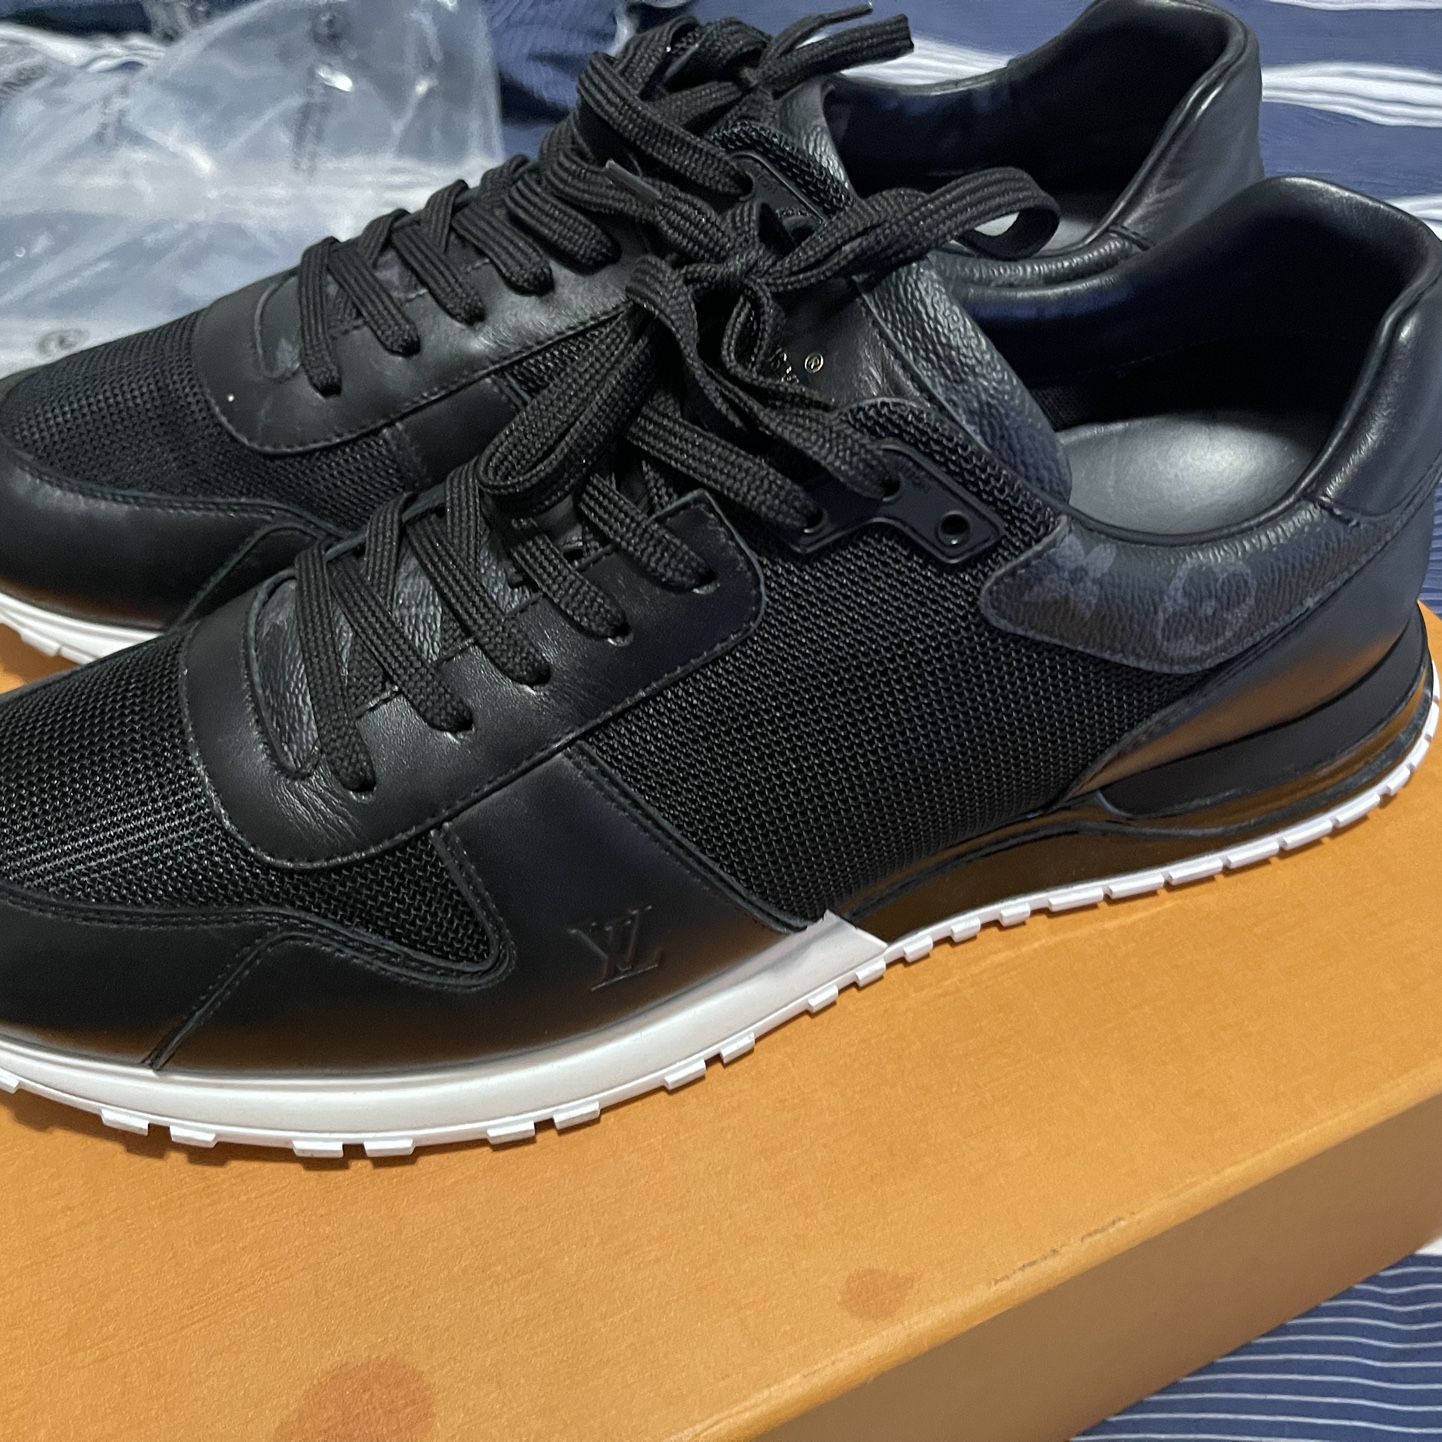 Louis Vuitton Sneakers for Sale in San Diego, CA - OfferUp